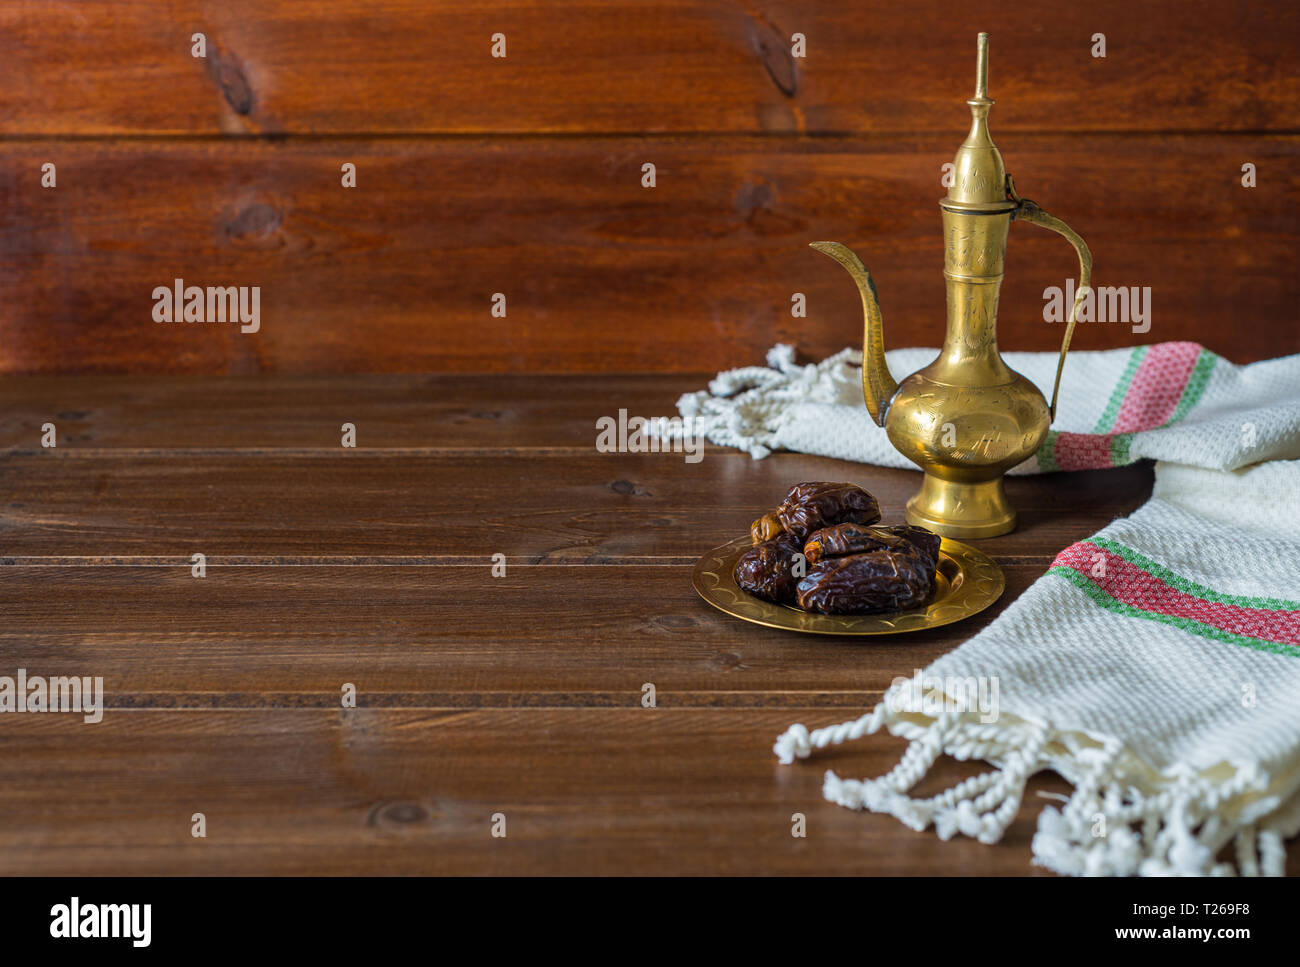 Ramadan food preparation, tea pot with dates, iftar food on wooden background with copy space Stock Photo